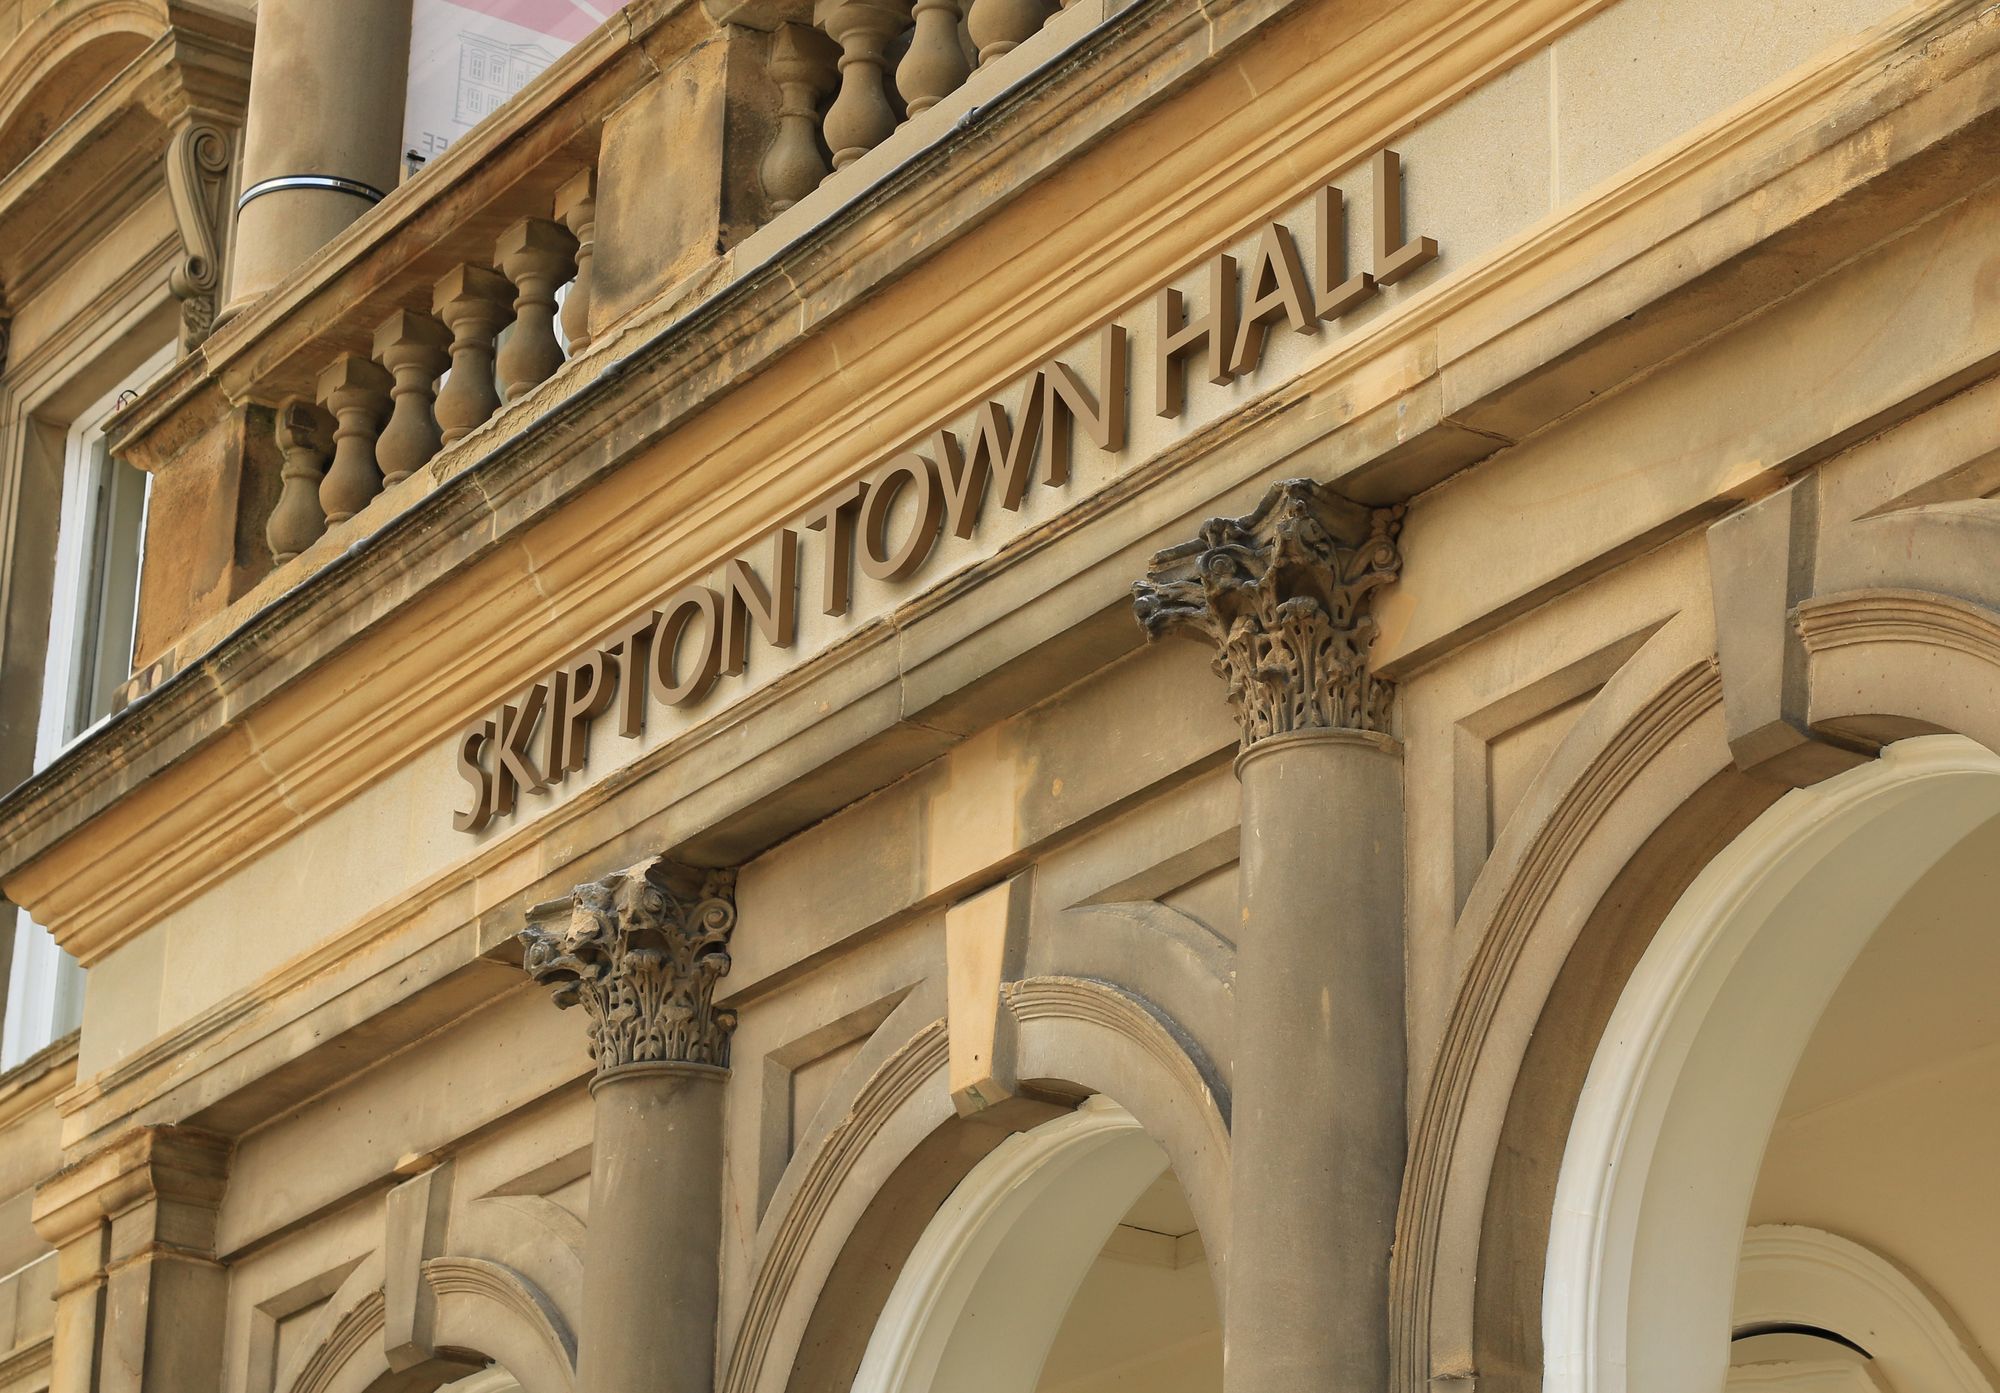 Close up of Skipton Town Hall's front & unique architecture